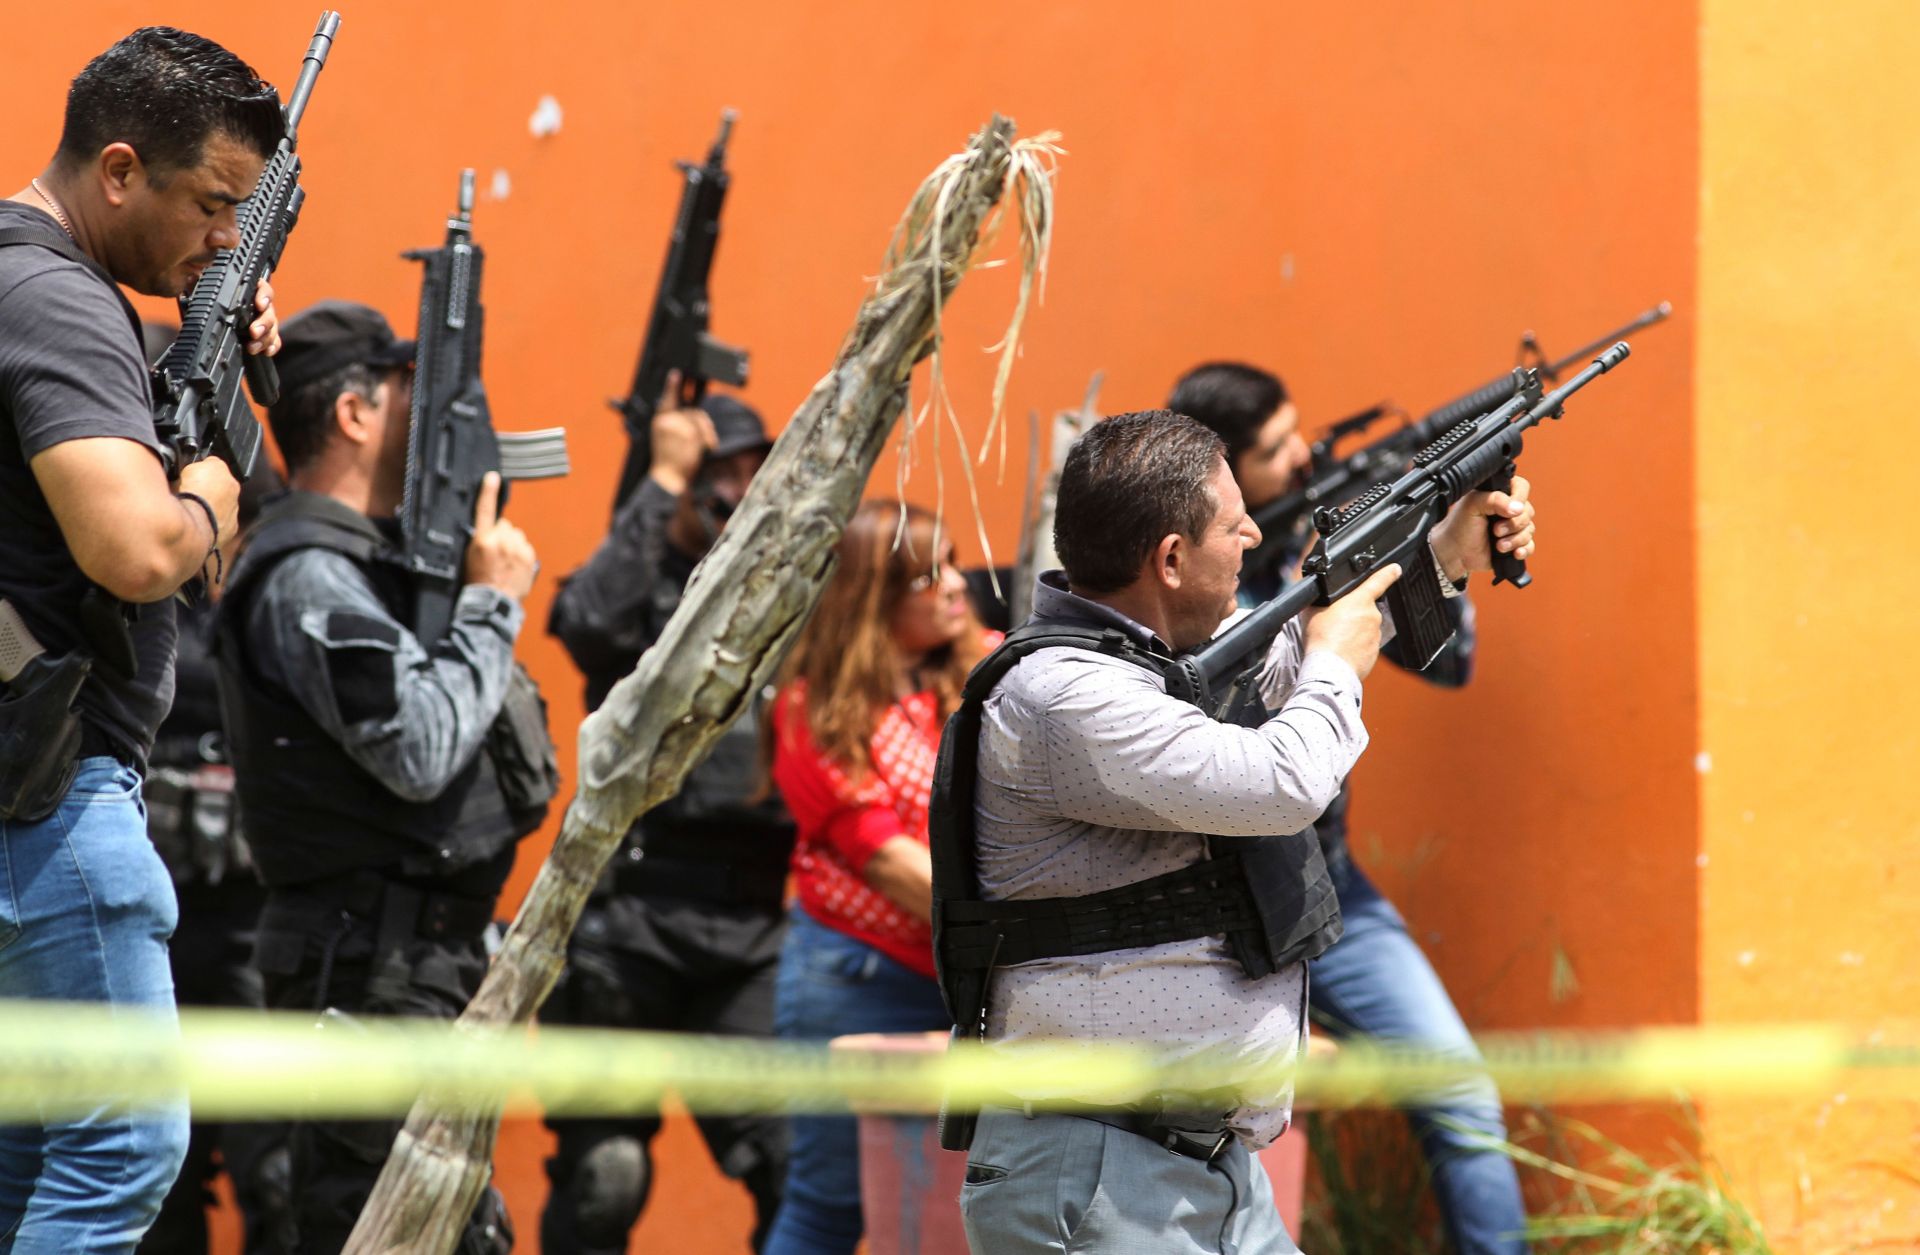 Mexican police take position outside a house during a search in Tlajomulco de Zuniga, Jalisco State, Mexico, on June 21, 2019.